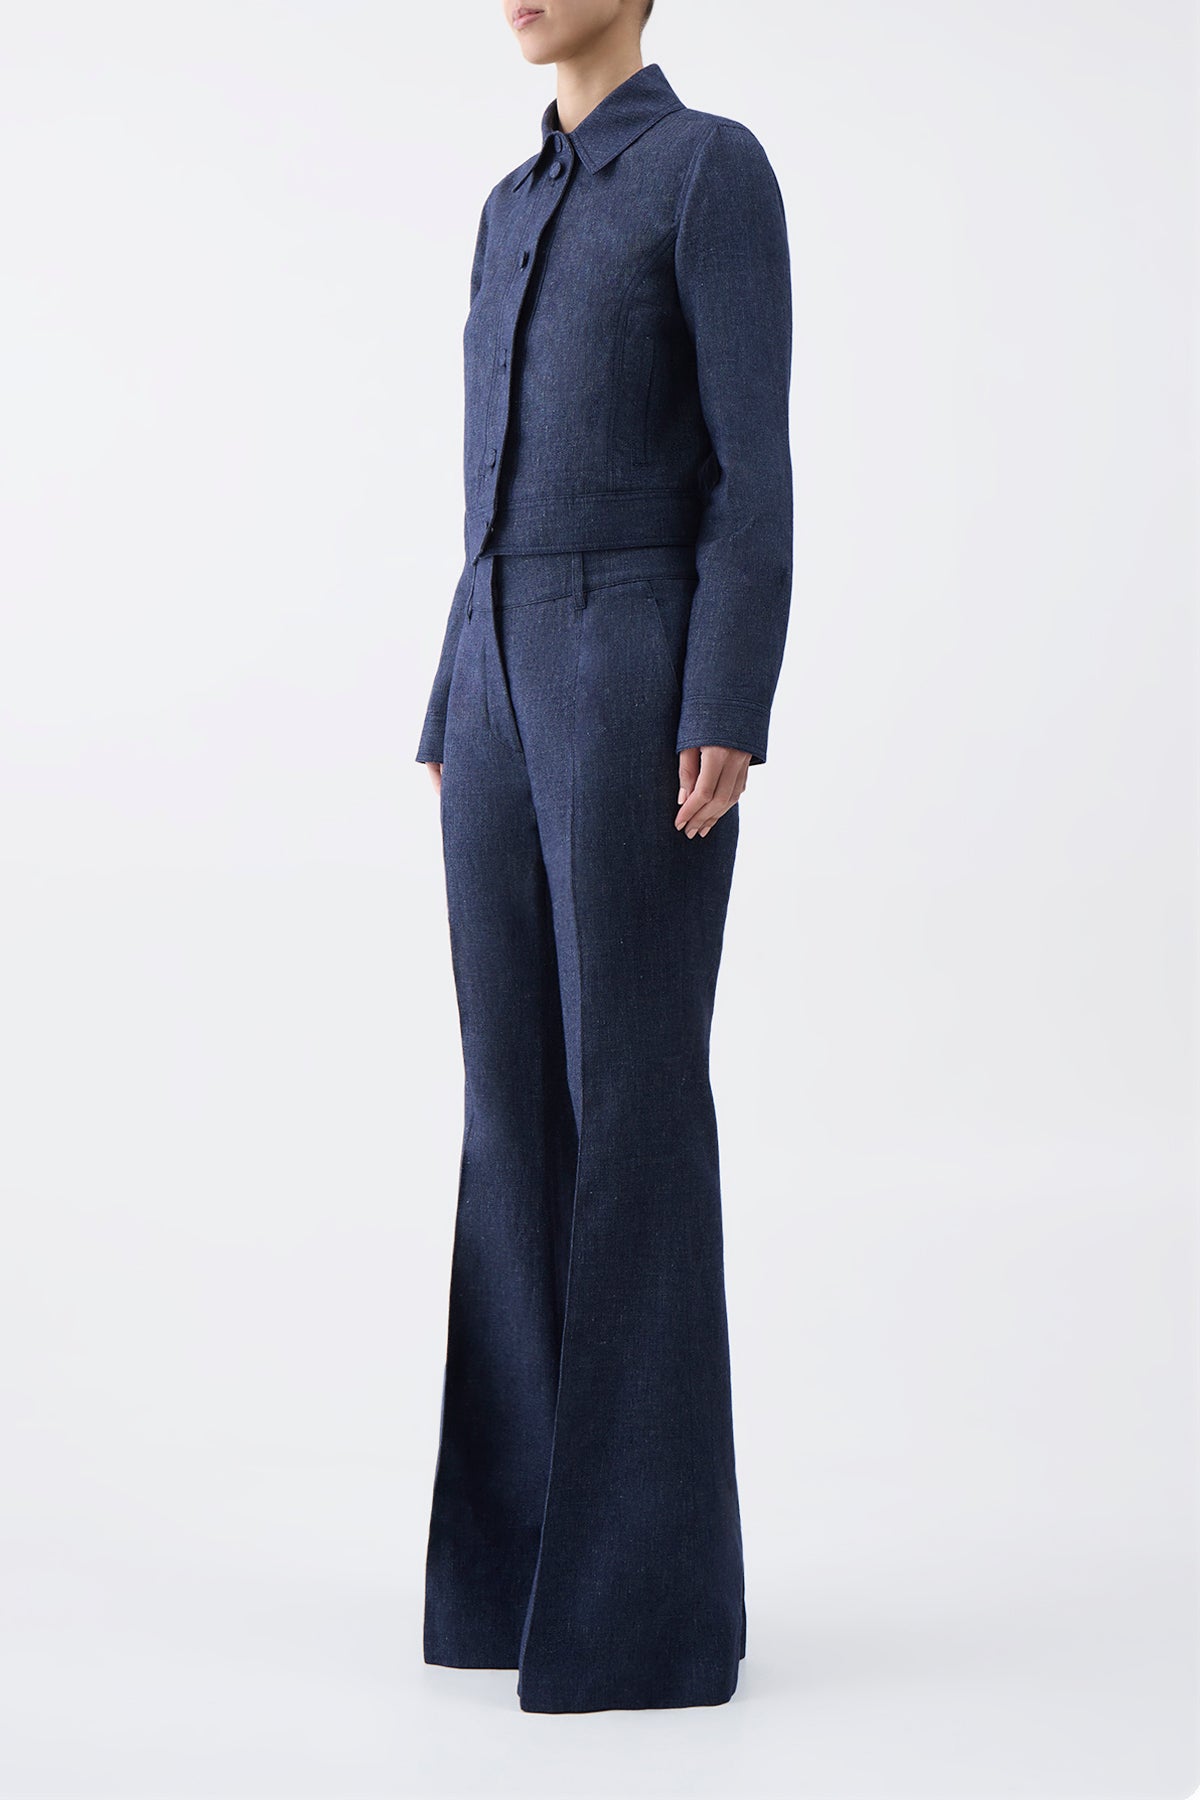 Thereza Jacket in Navy Wool Linen and Cashmere Silk